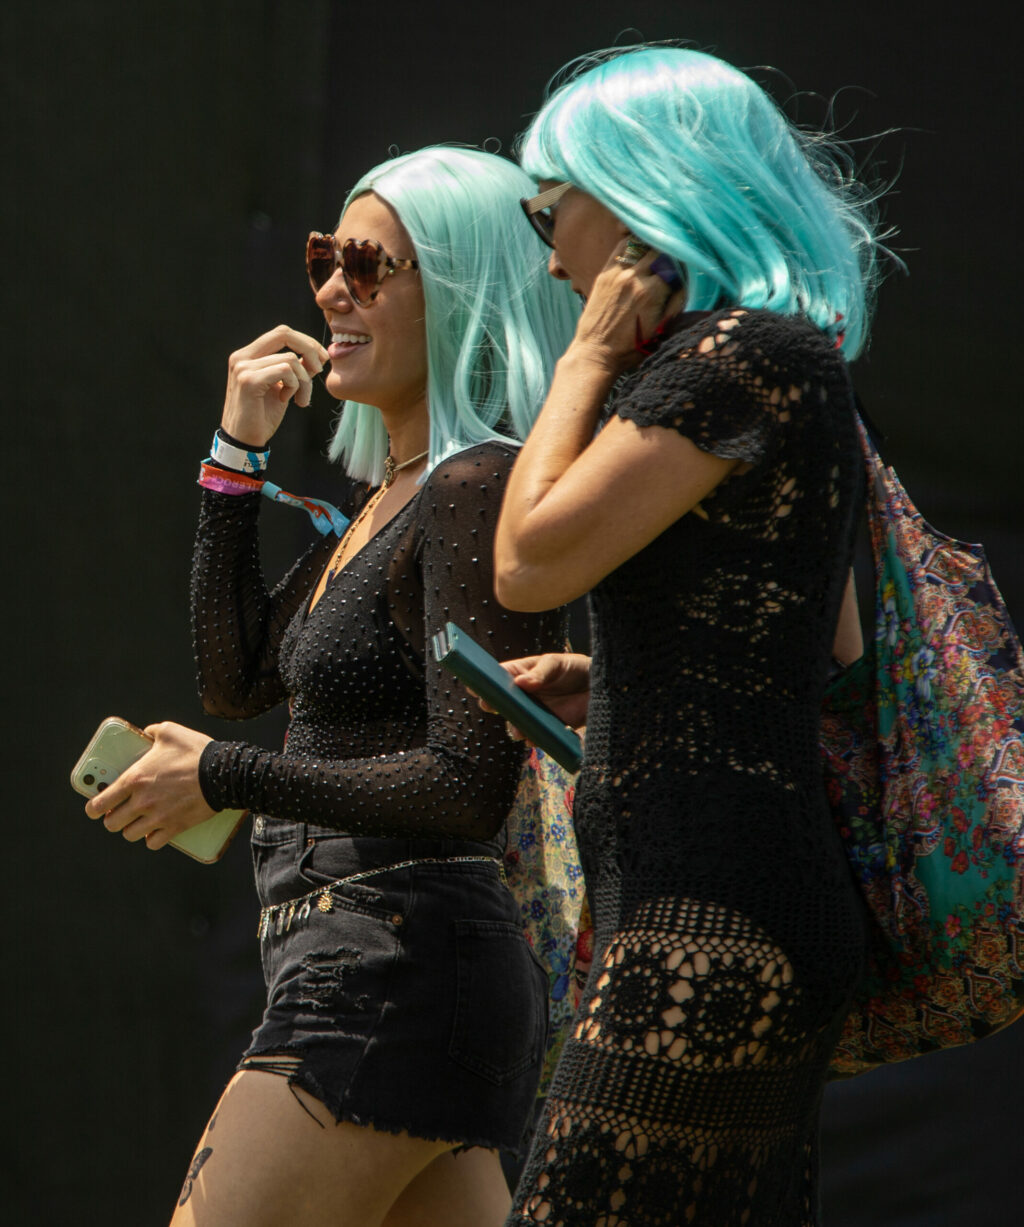 BottleRock guests enjoy the sunshine and music of Paris Jackson on the JaM Cellars Stage at the 10th annual BottleRock Napa Valley, Saturday, May 27, 2023. (Chad Surmick / The Press Democrat)